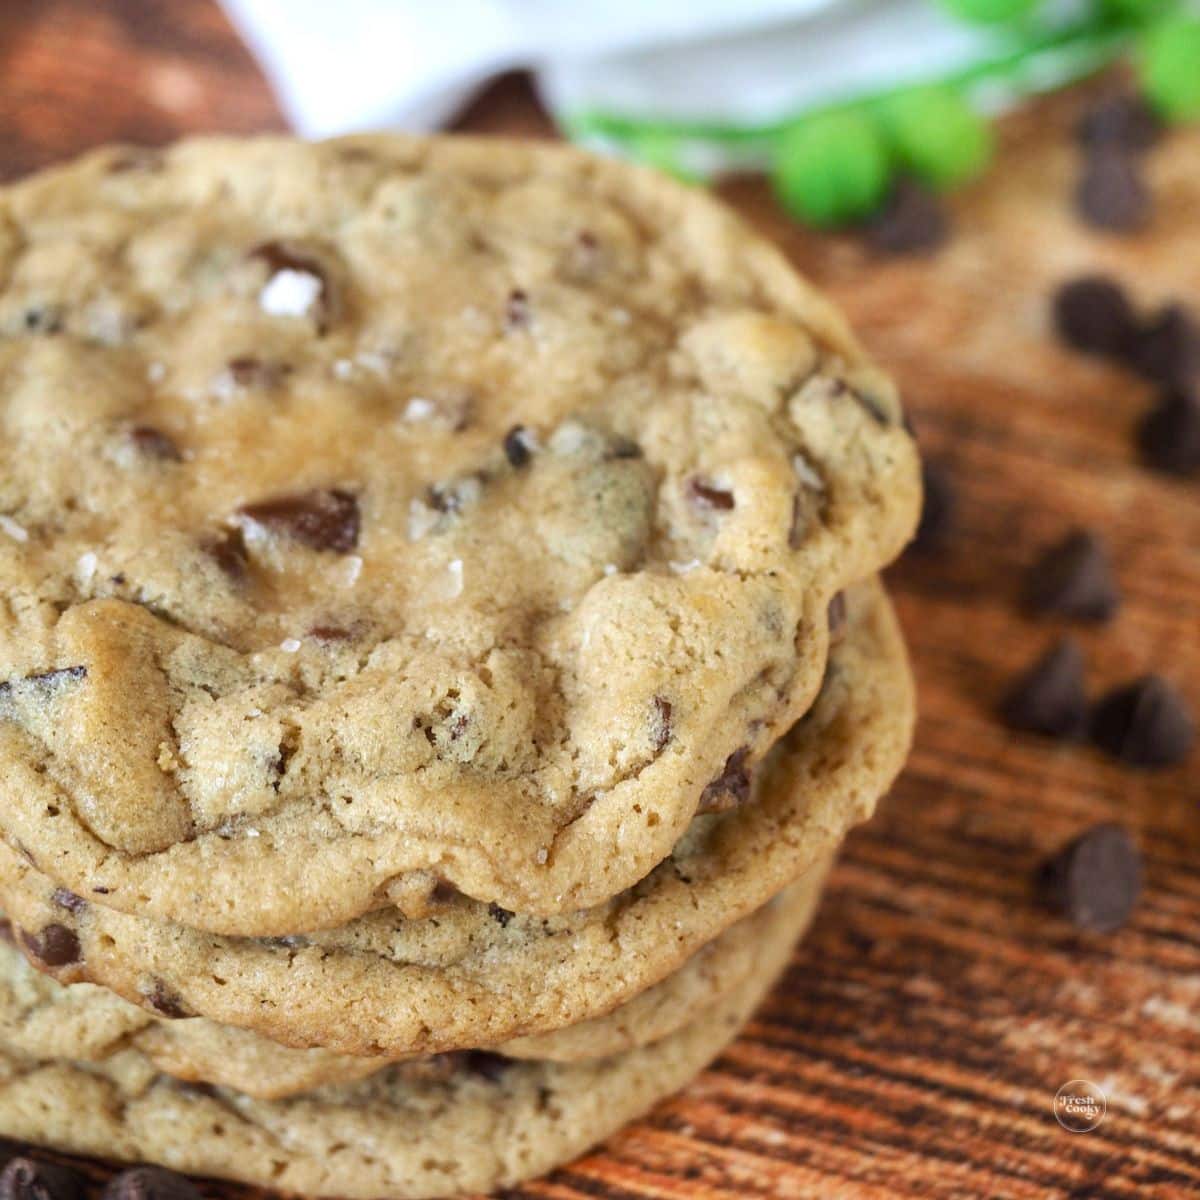 https://www.thefreshcooky.com/wp-content/uploads/2017/03/chewy-chocolate-chip-cookies-square-1.jpg